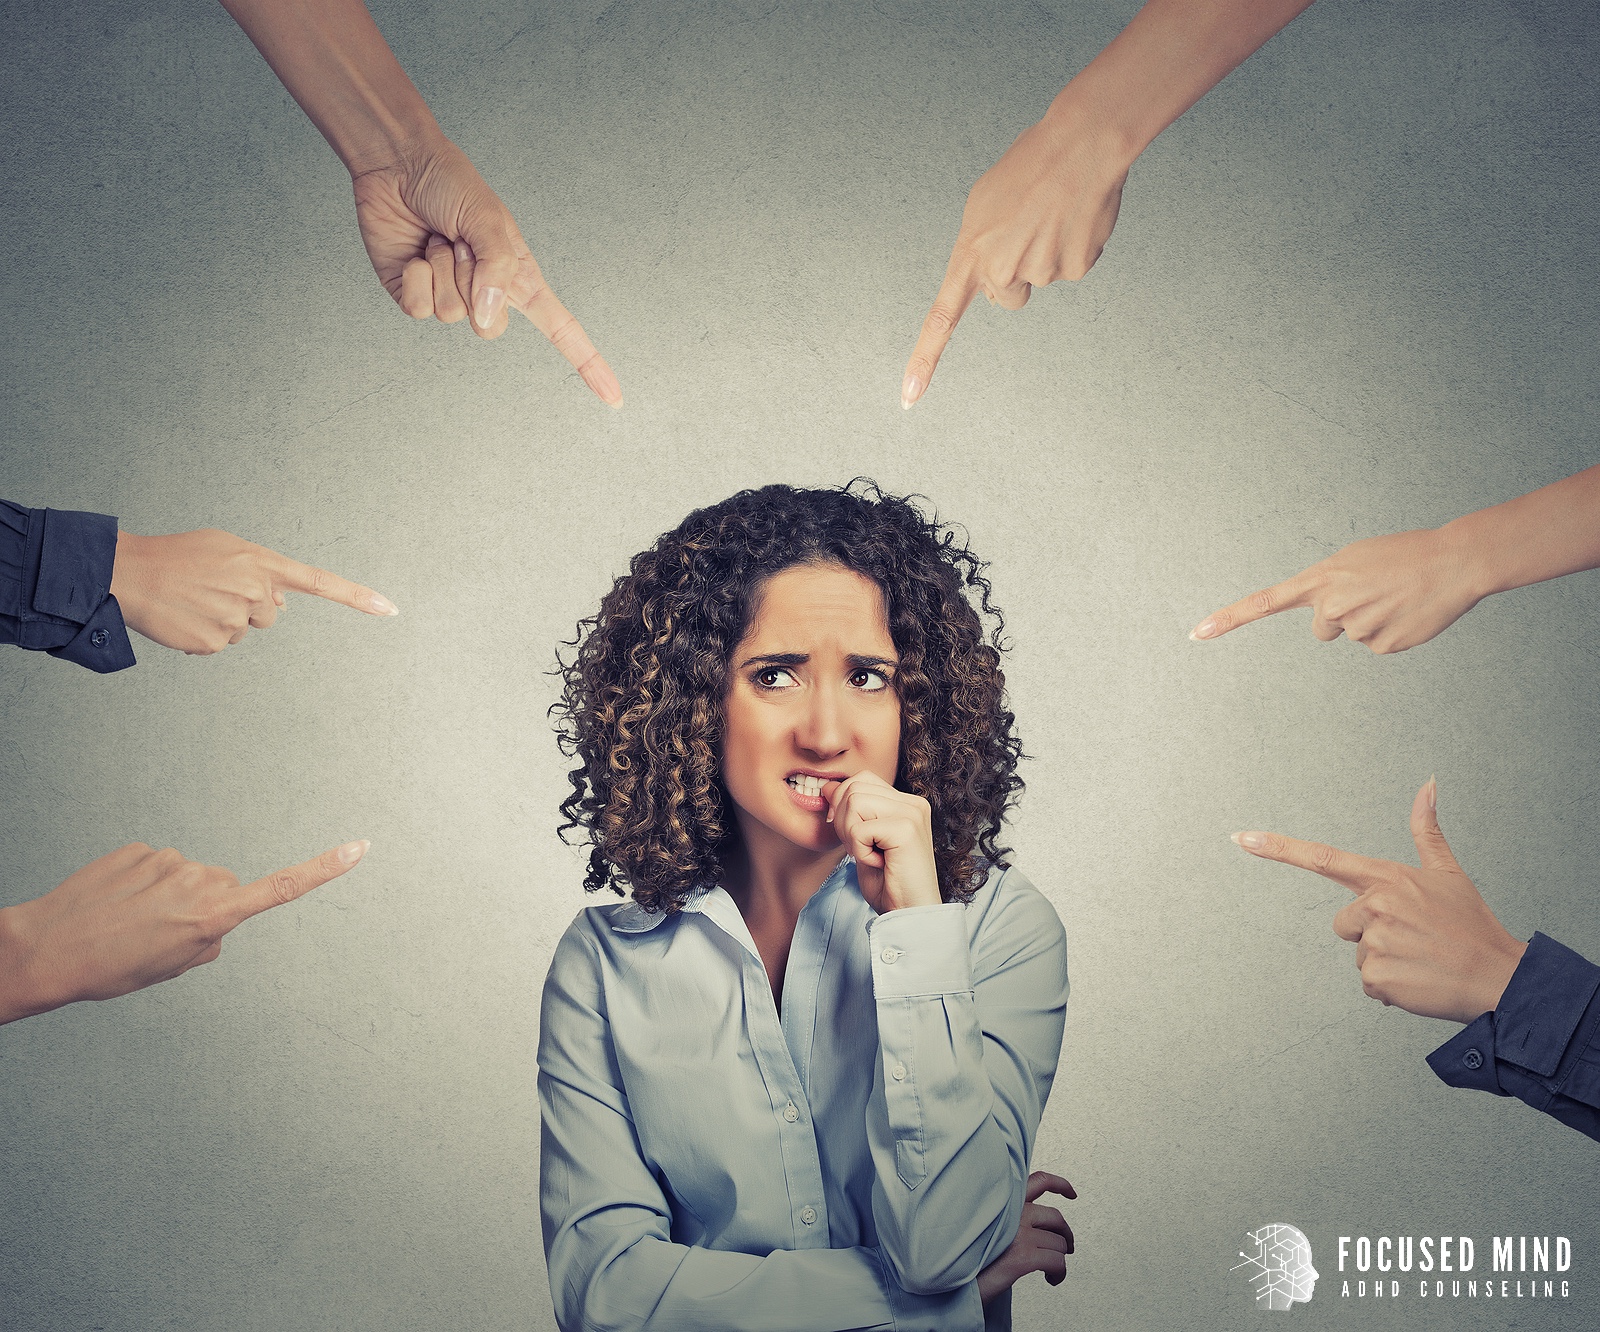 Hands point at a worried woman as she bites a fingernail nervously. Get support for ADHD and relationships by contacting an adult ADHD therapist in Ohio. They can help you address RSD and offer ADHD testing for adults in Columbus, OH today.